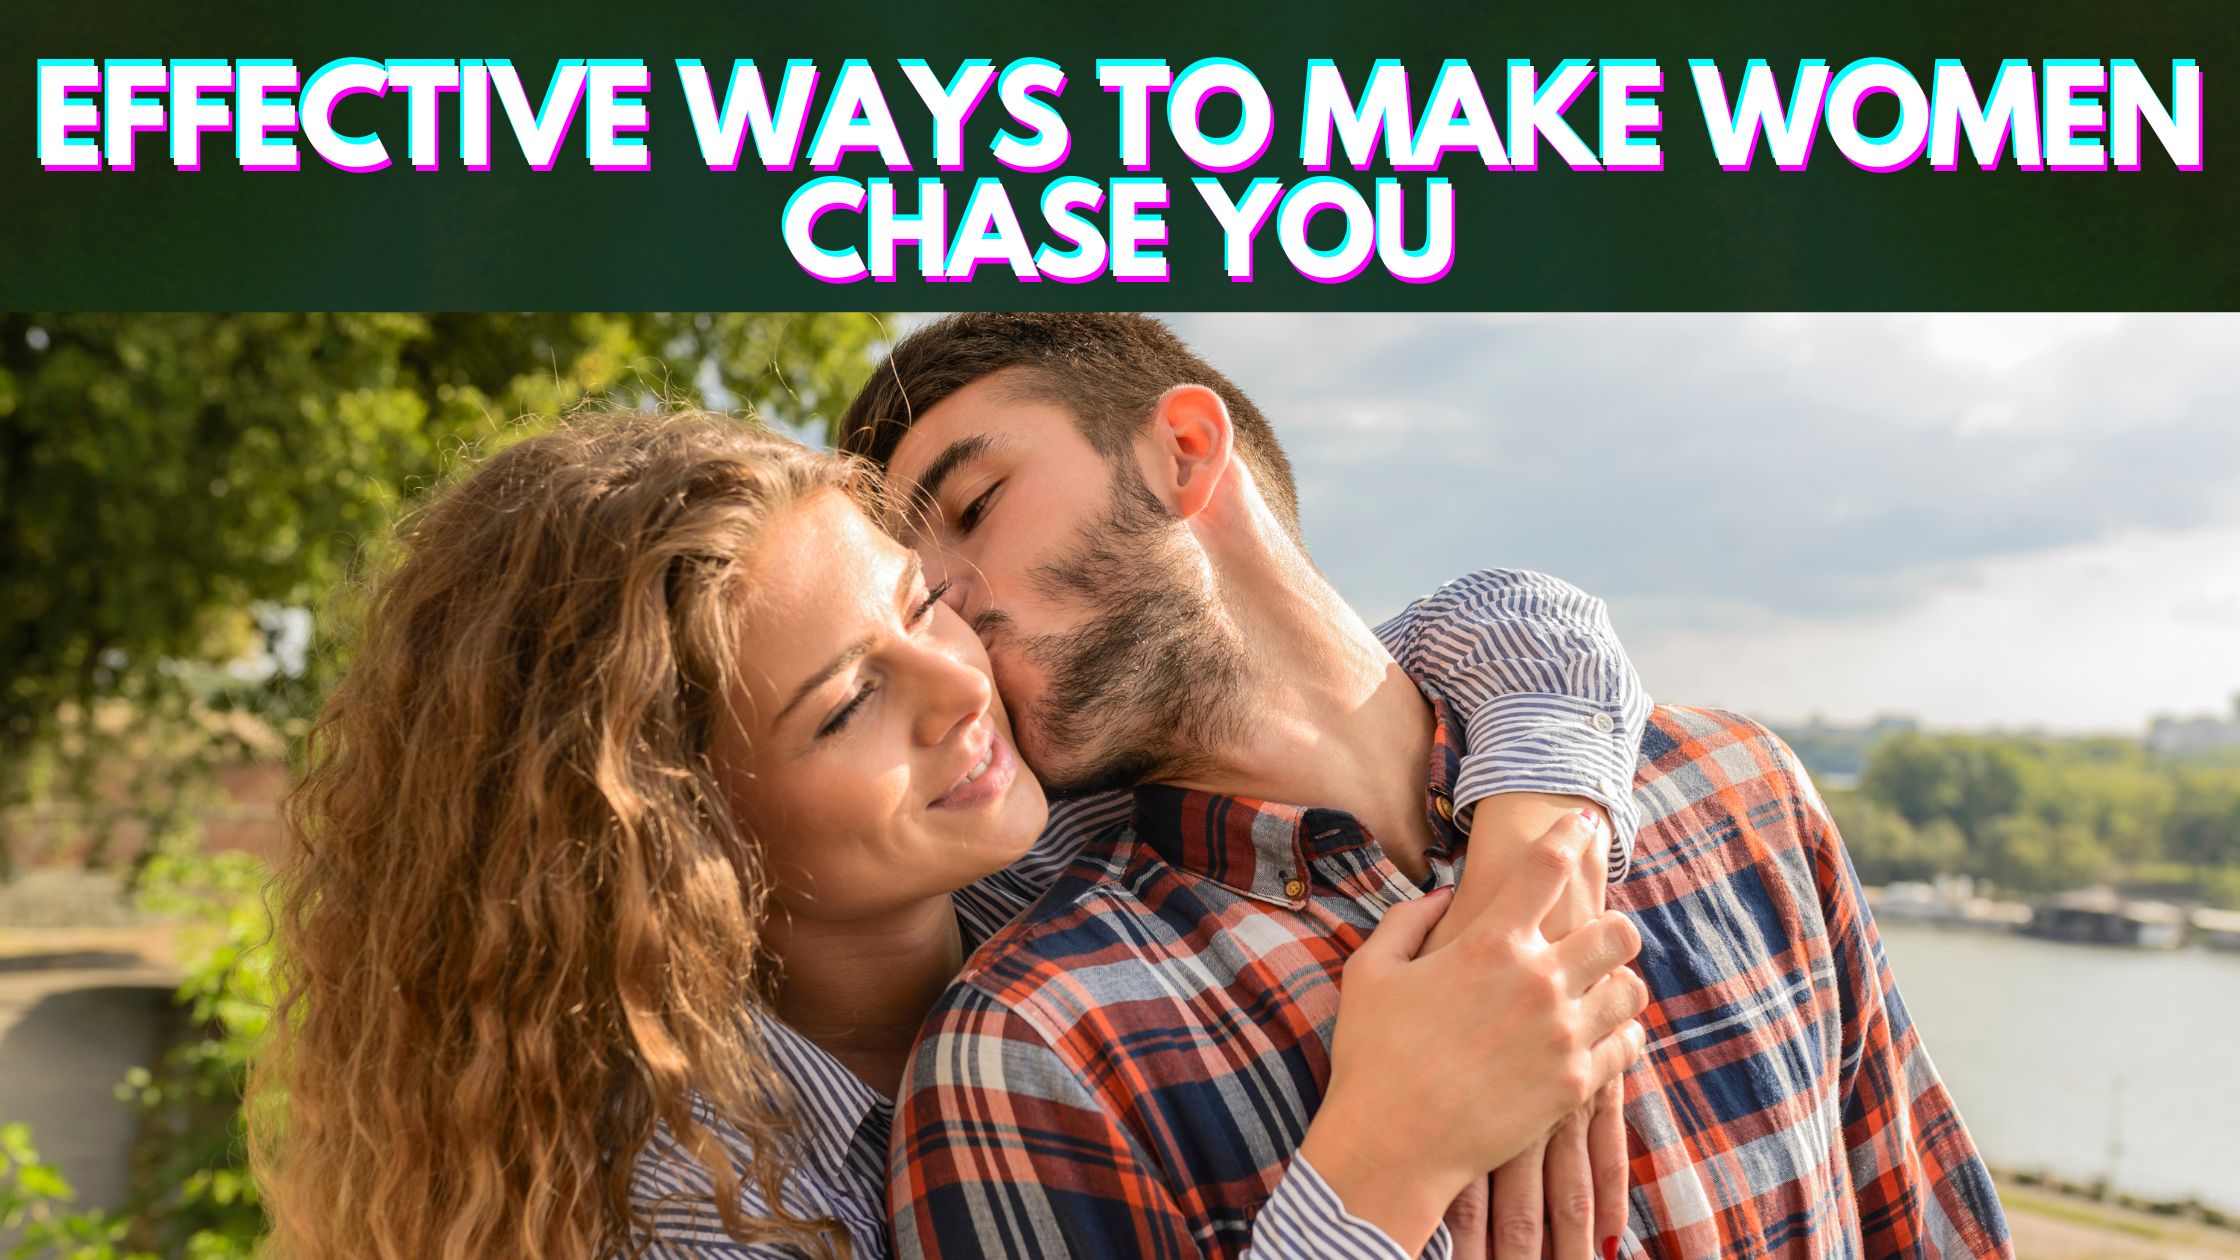 Effective Ways to Make Women Chase You